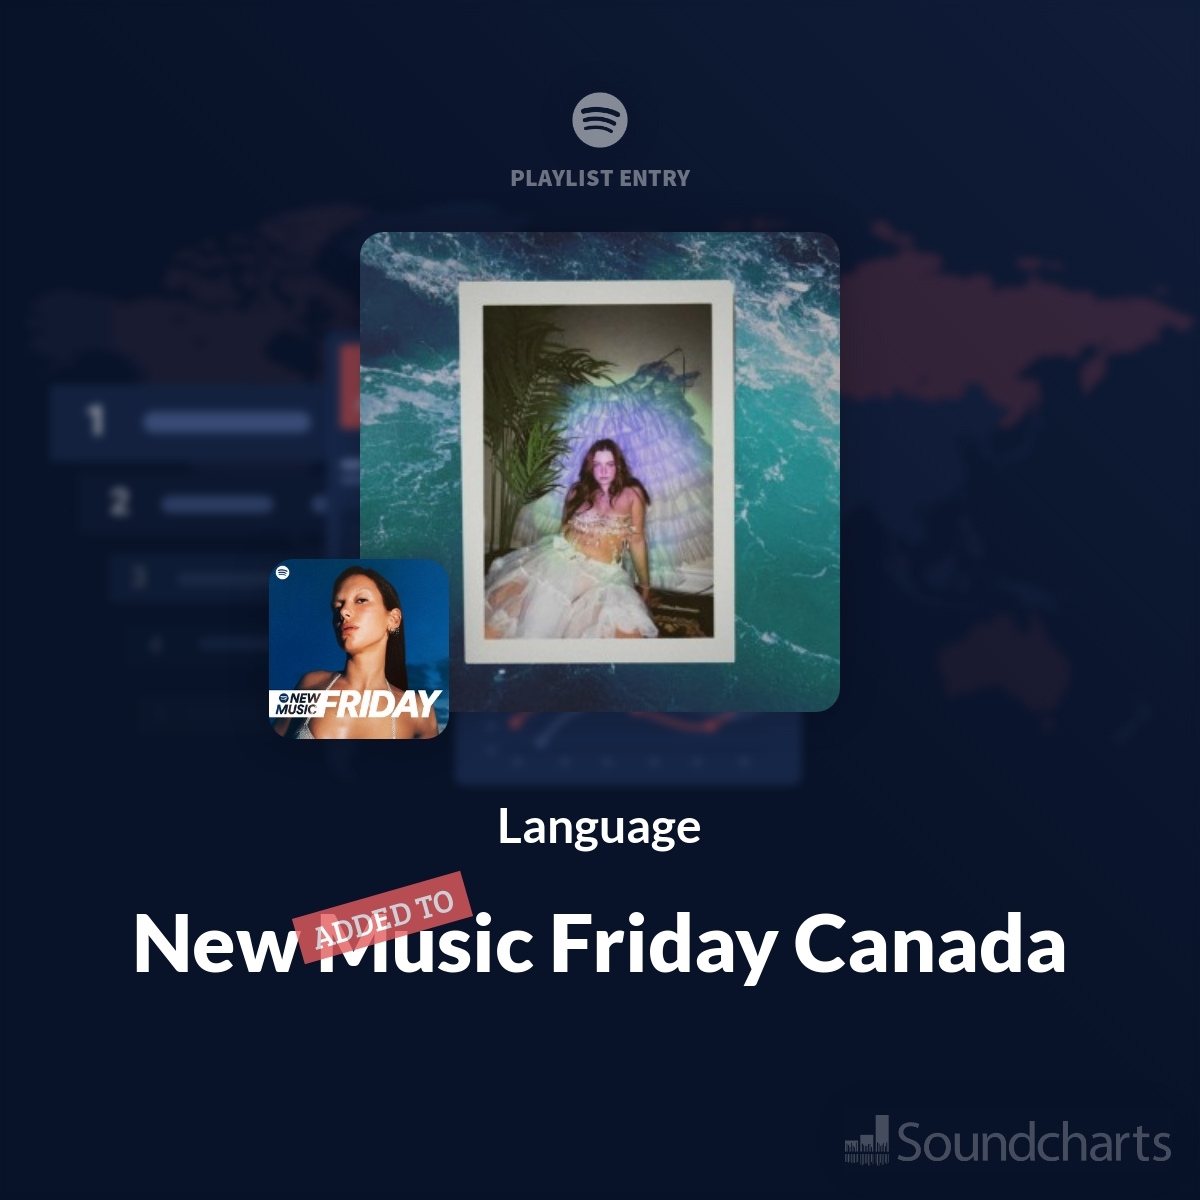 @carysofficial 🎉 Congratulations! 'Language' has been featured on 'New Music Friday Canada' playlist on Spotify! 🎧